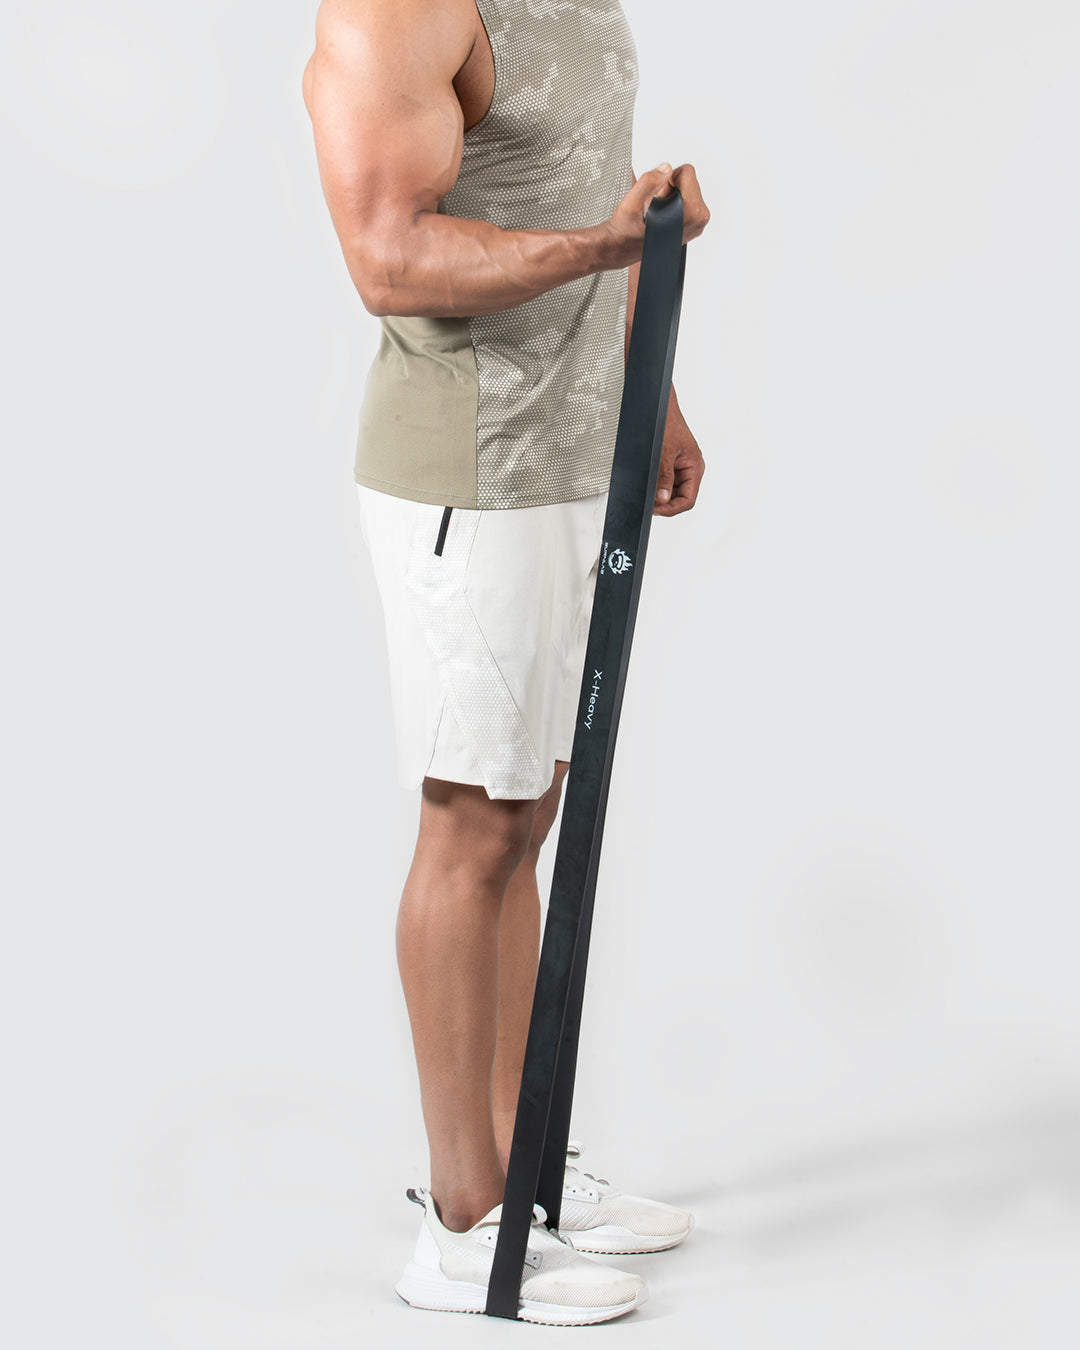 Resistance Bands for Stretching, Strength Training and Pull Up Assist - Burnlab.Co